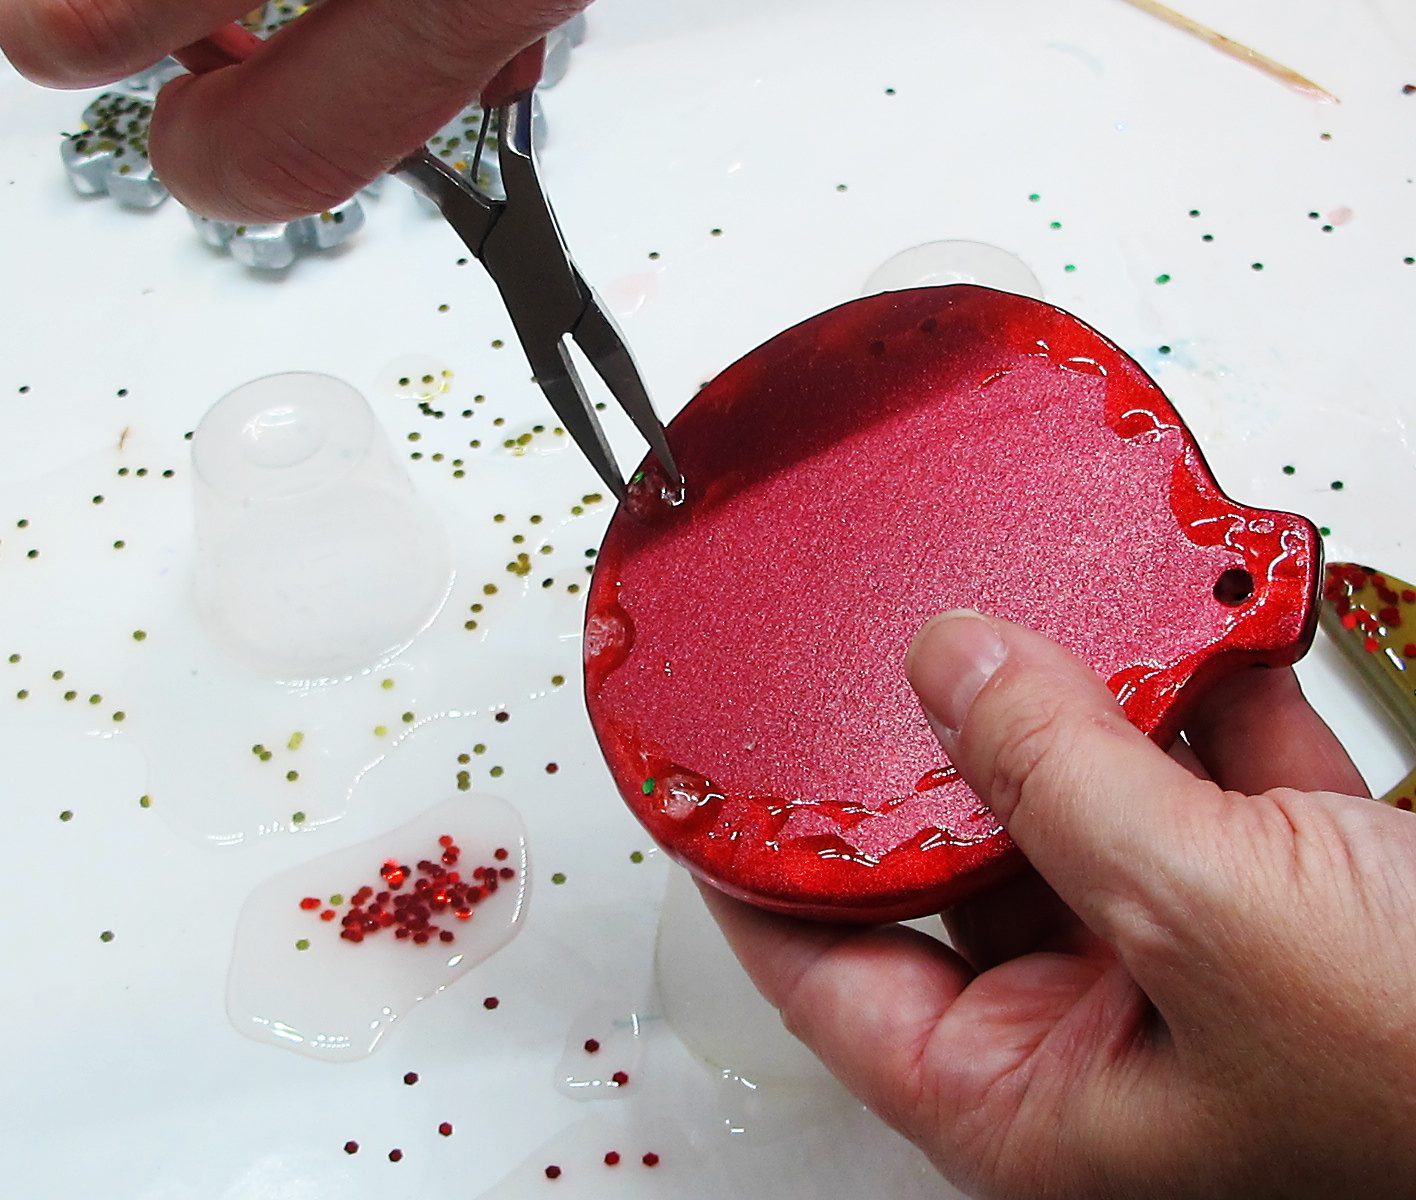 Trimming resin drips on an ornament with pliers.